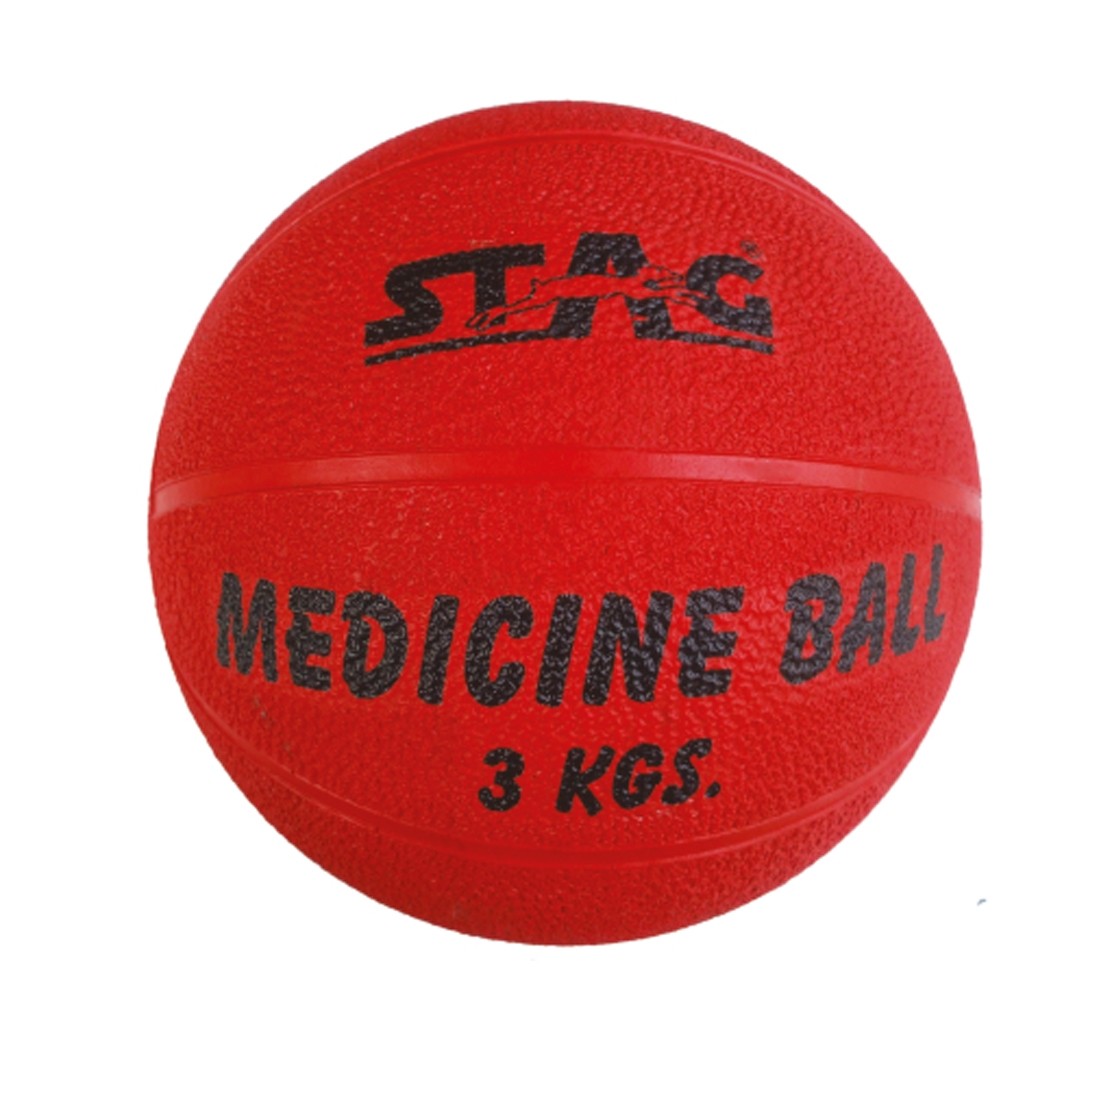 STAG MEDICINE BOUNCING GYM BALL RUBBER INFLATABLE 2KG